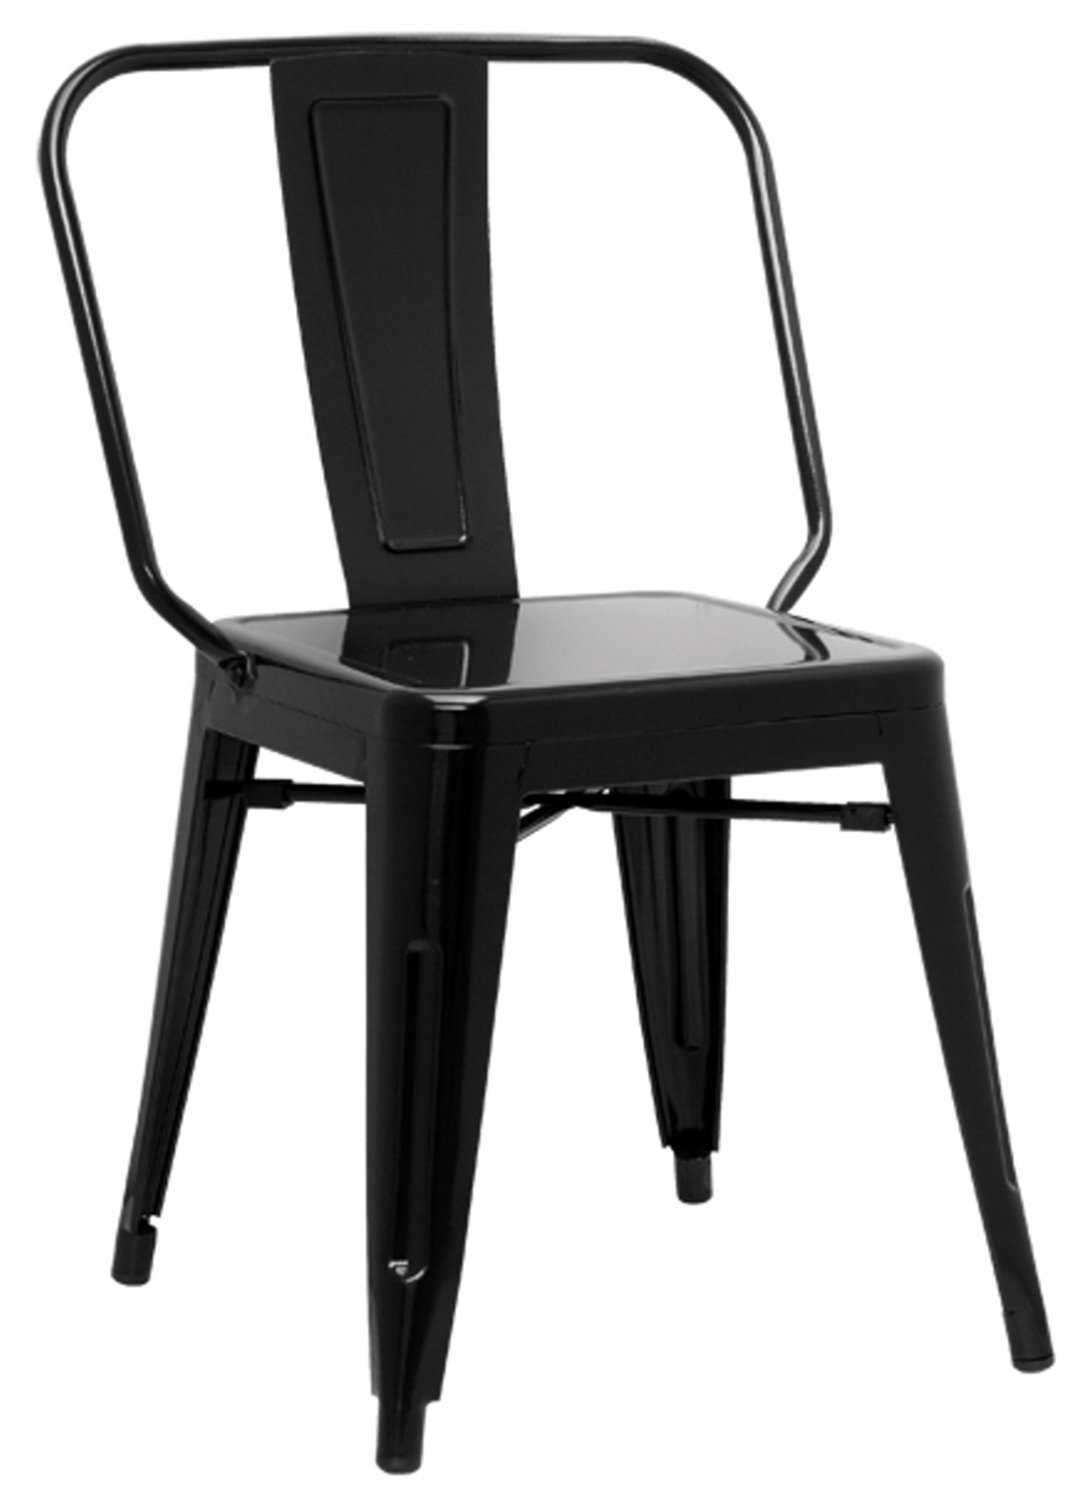 Chintaly Imports 8023 Galvanized Steel Side Chair - Black